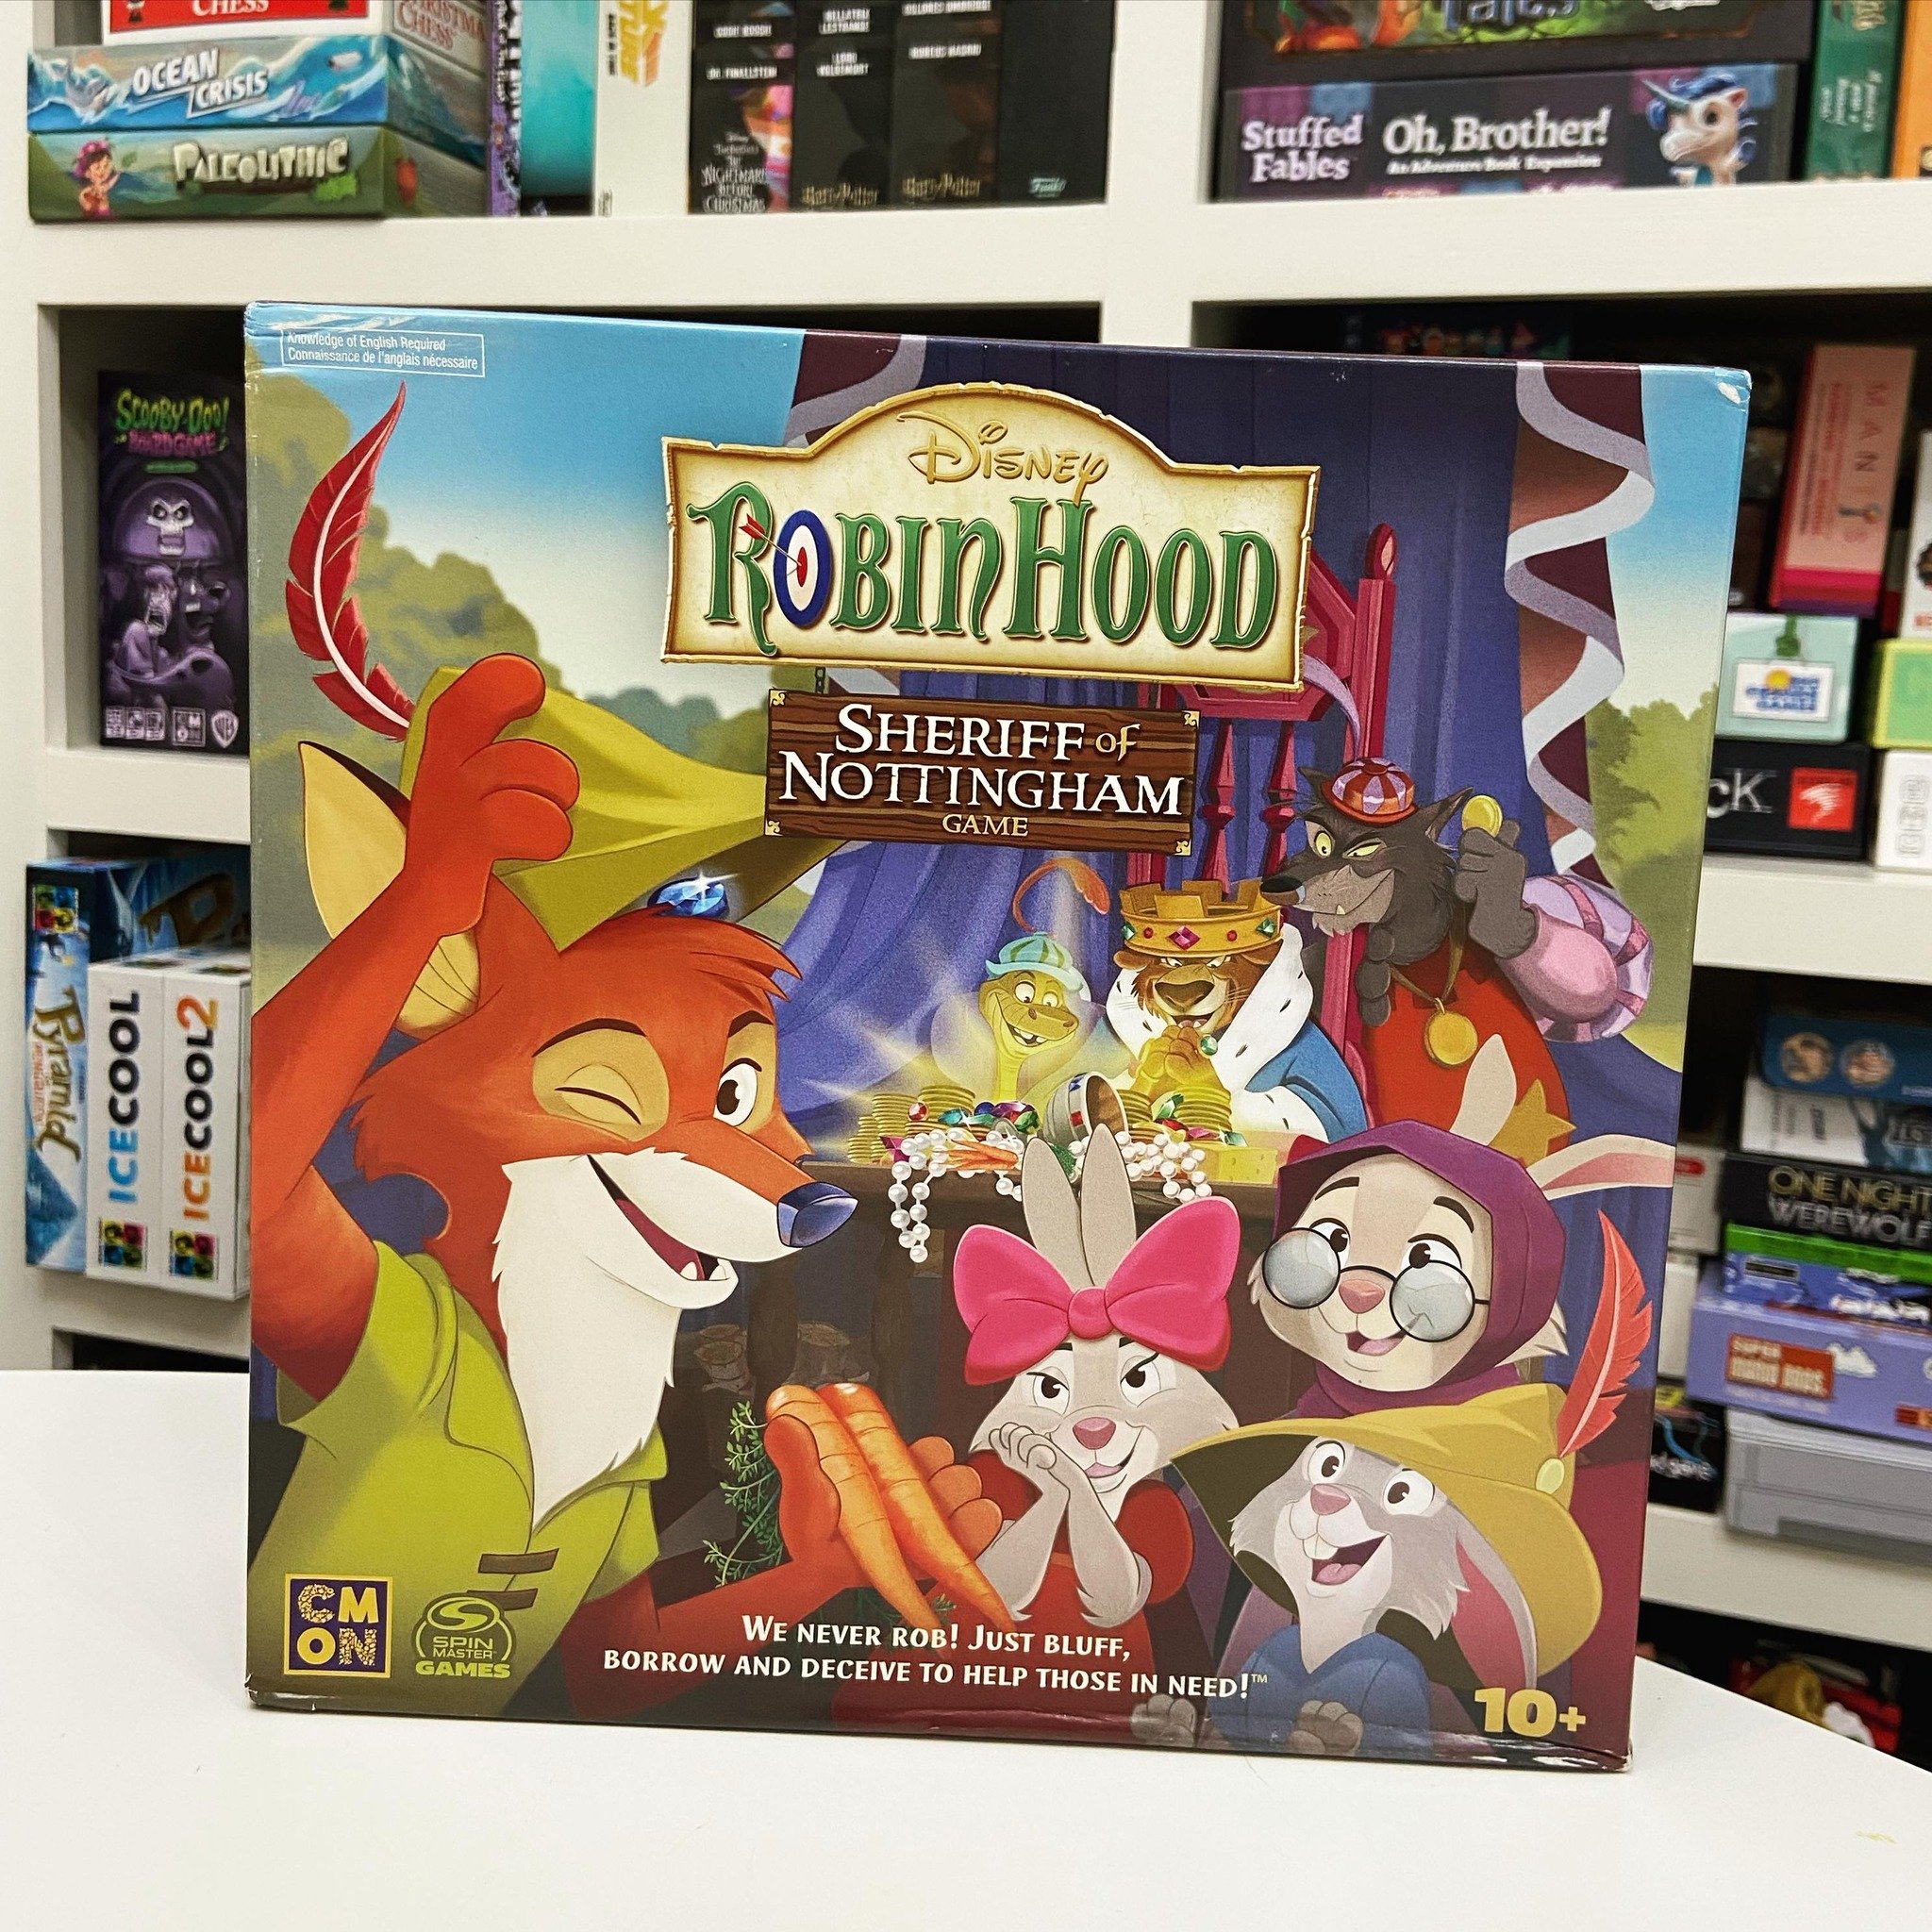 Not going to lie I&rsquo;m super excited about this one. Popular board game getting a natural reskin with one of the best Disney movies ever! What more could you ask for? 🦊